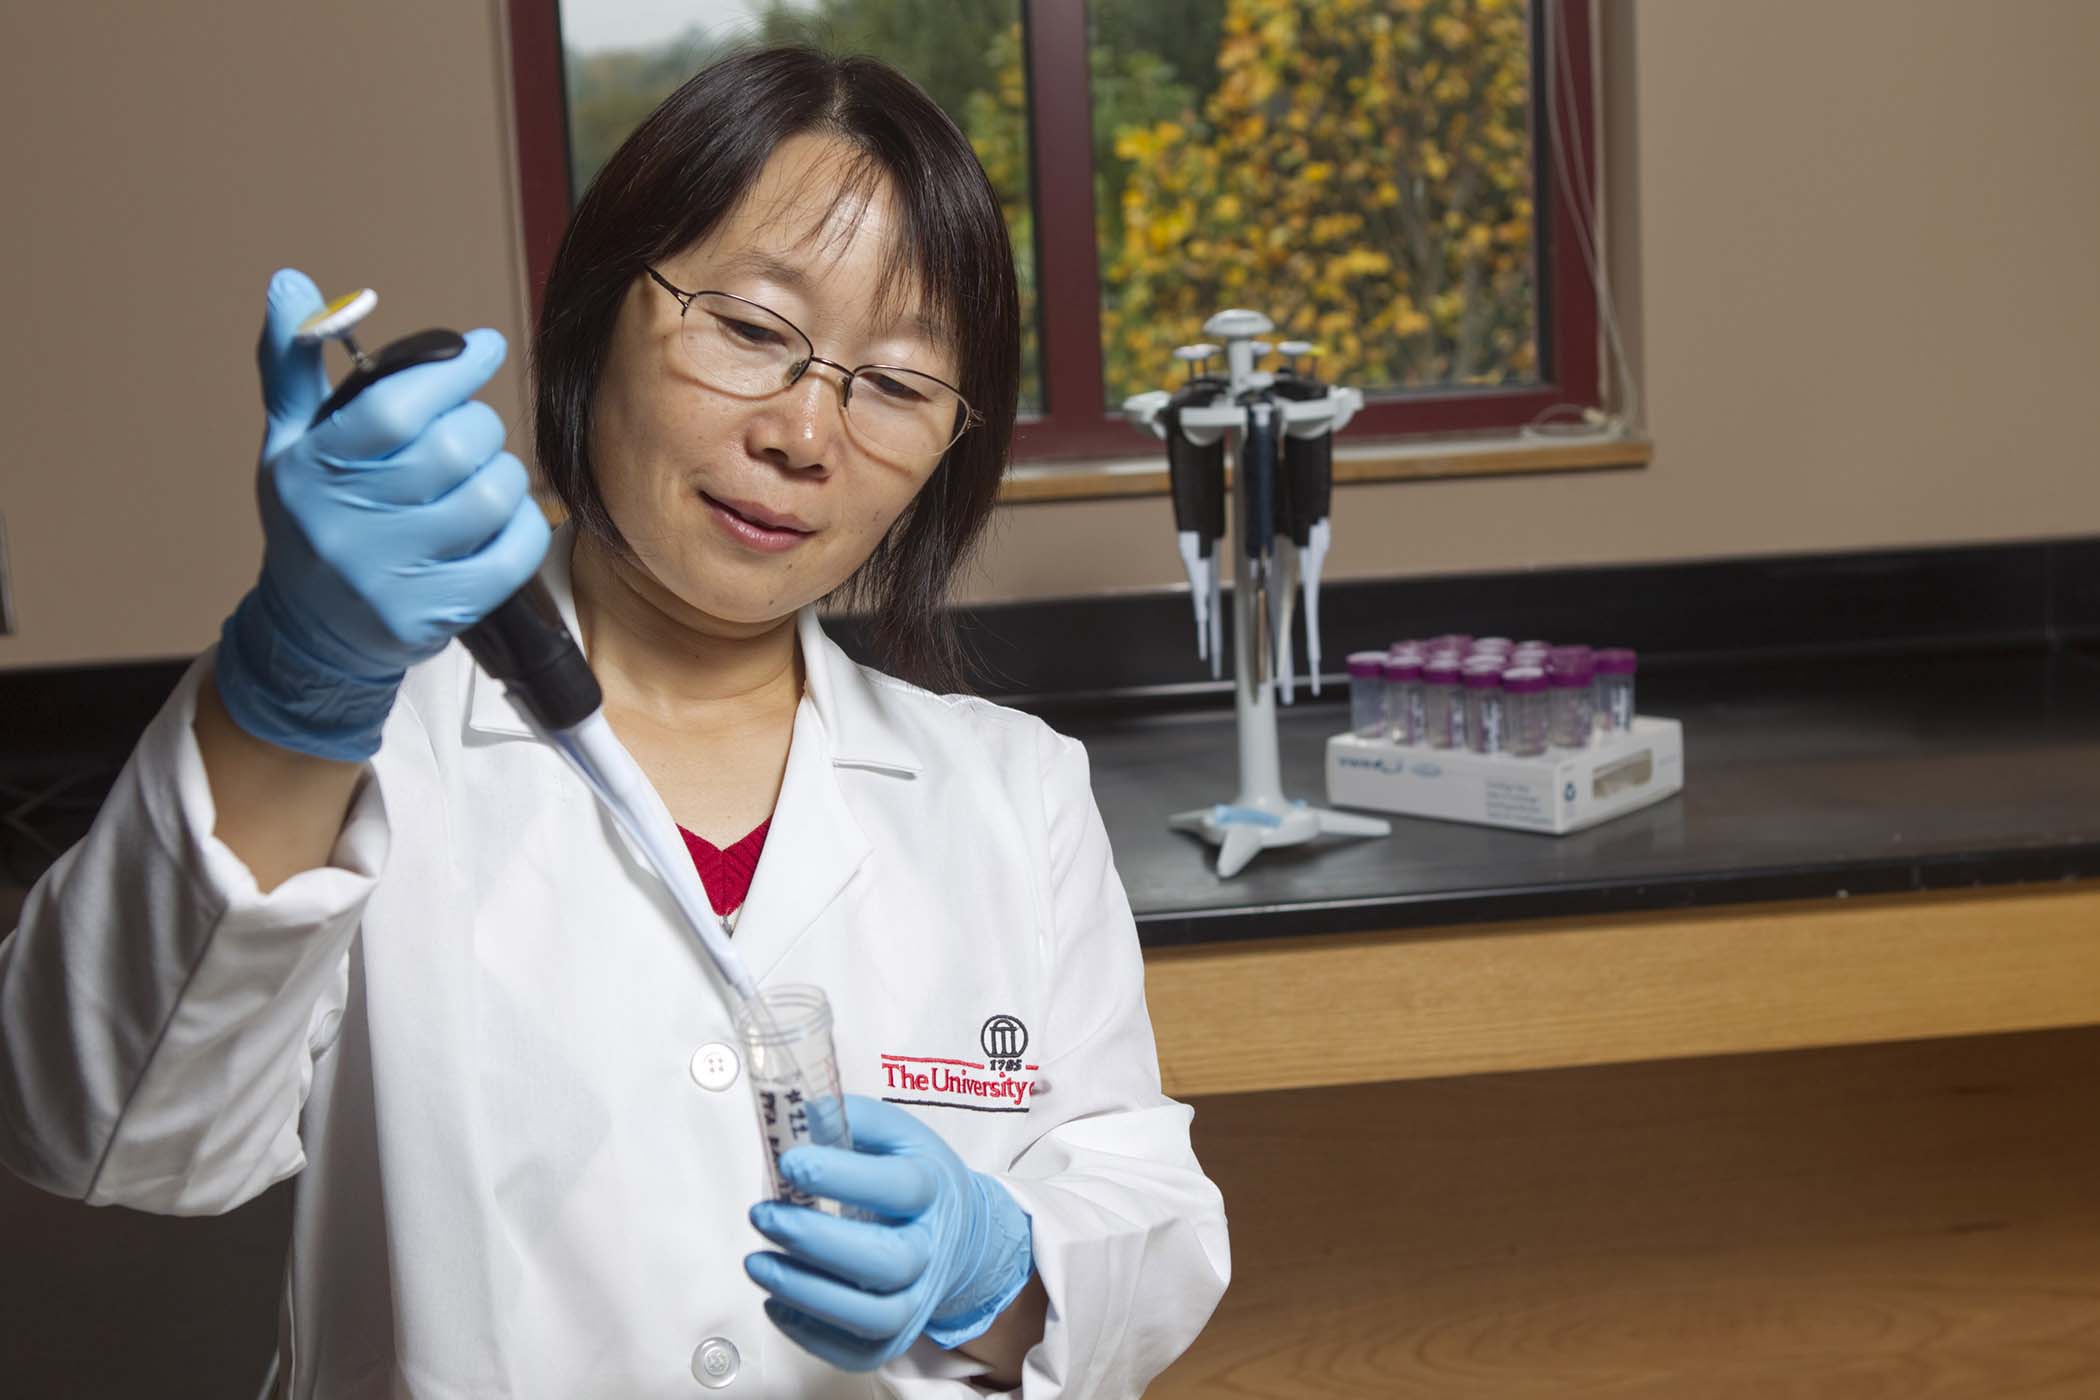 Hongxiang Liu, an assistant professor of animal and dairy science at UGA, also works as part of the the UGA Regenerative Medicine program and UGA Obesity Initiative. Her work focuses on the discovering the connections between taste bud physiology and obesity.